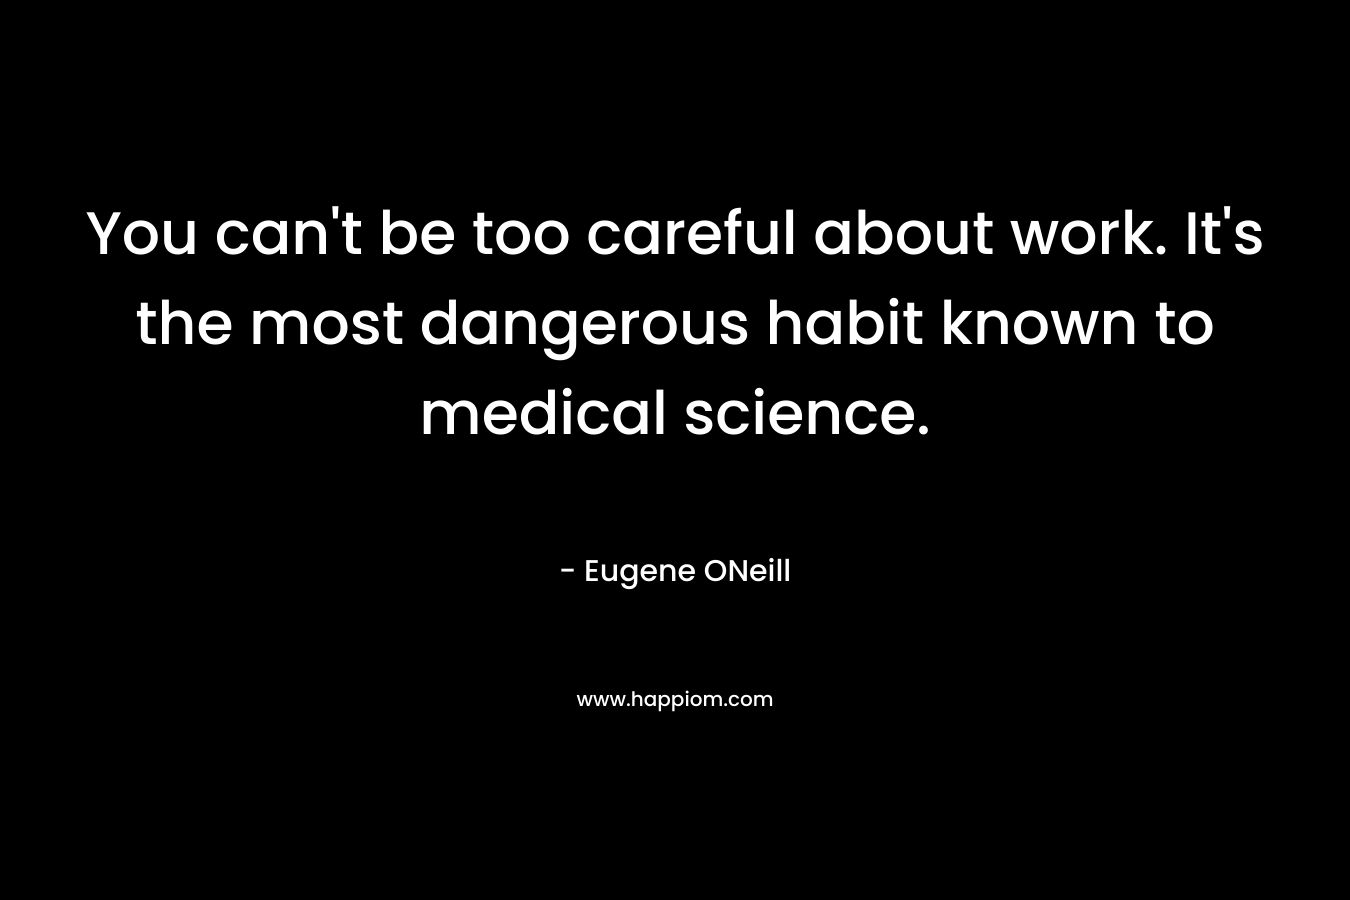 You can’t be too careful about work. It’s the most dangerous habit known to medical science. – Eugene ONeill